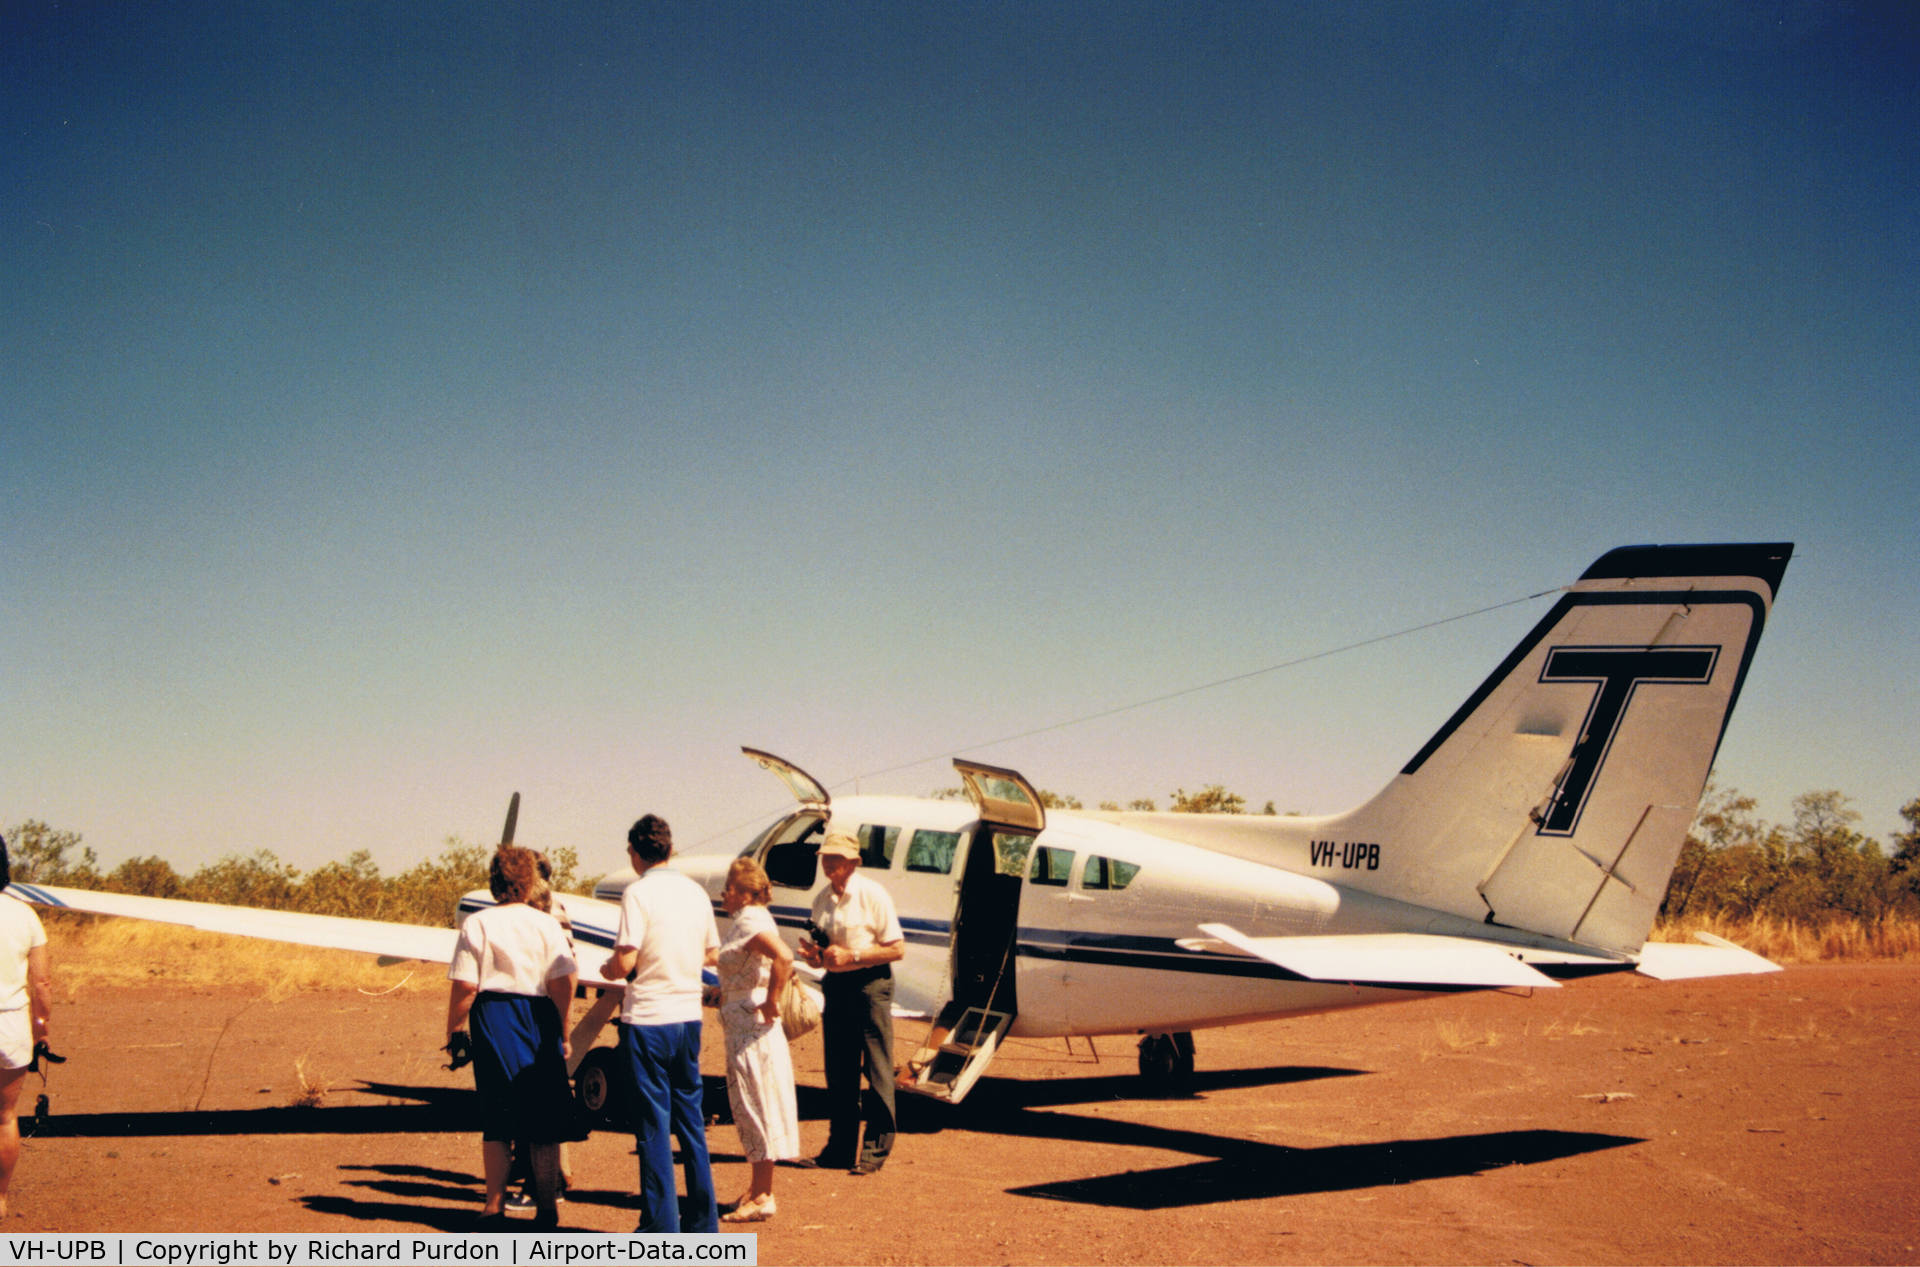 VH-UPB, 1977 Cessna 150M C/N 15079182, In 1998 this aircraft was used for joy flights over Katherine George.